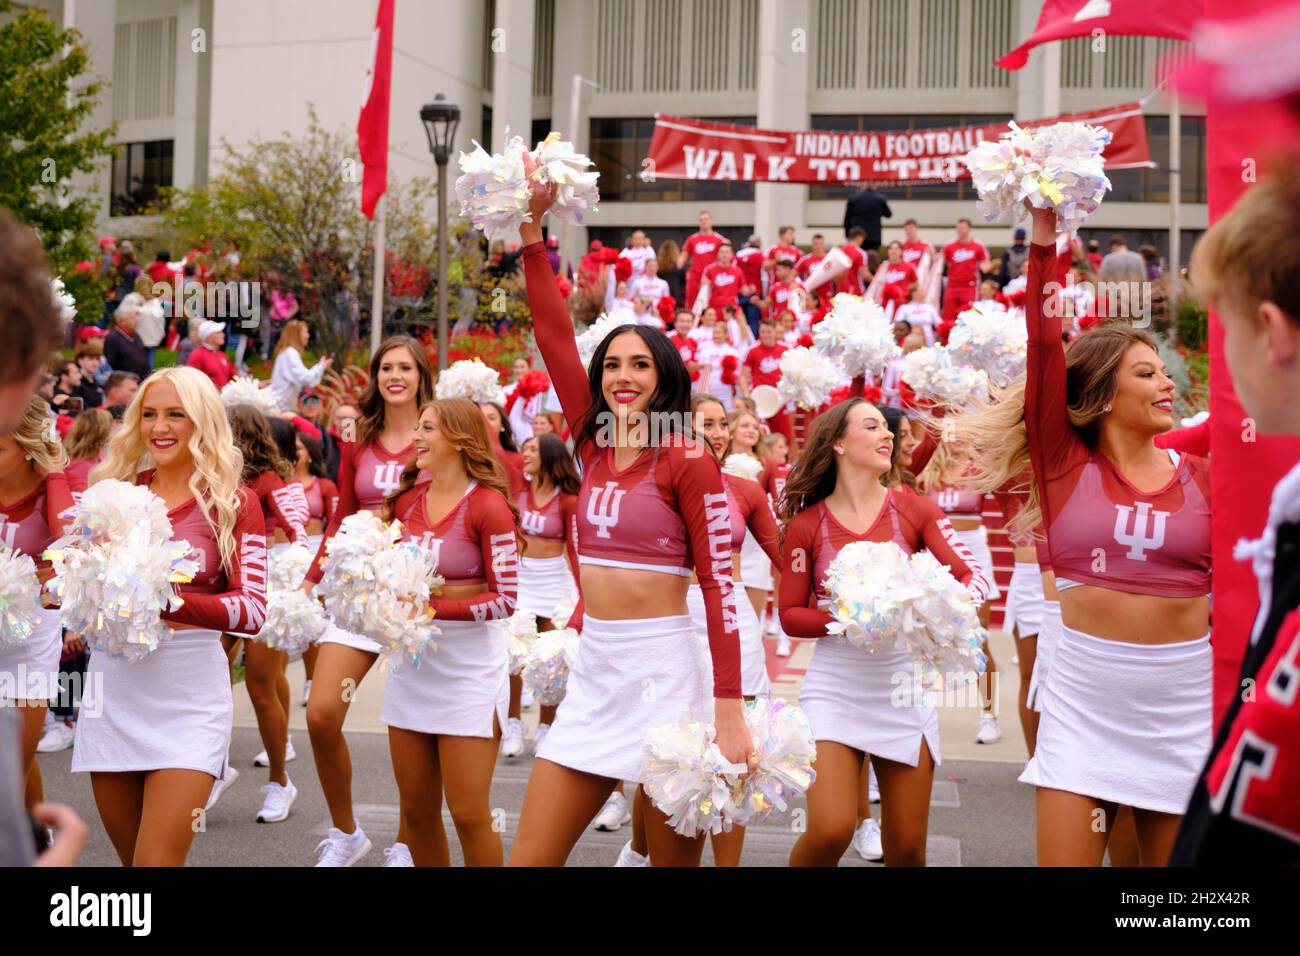 BLOOMINGTON, UNITED STATES - 2021/10/23: Indiana University’s Redsteppers cheer on the steps to Assembly Hall before IU plays Ohio State during an NCAA football game on October 16, 2021 at Memorial Stadium in Bloomington, Ind. Ohio State beat Indiana University 54-7. Stock Photo